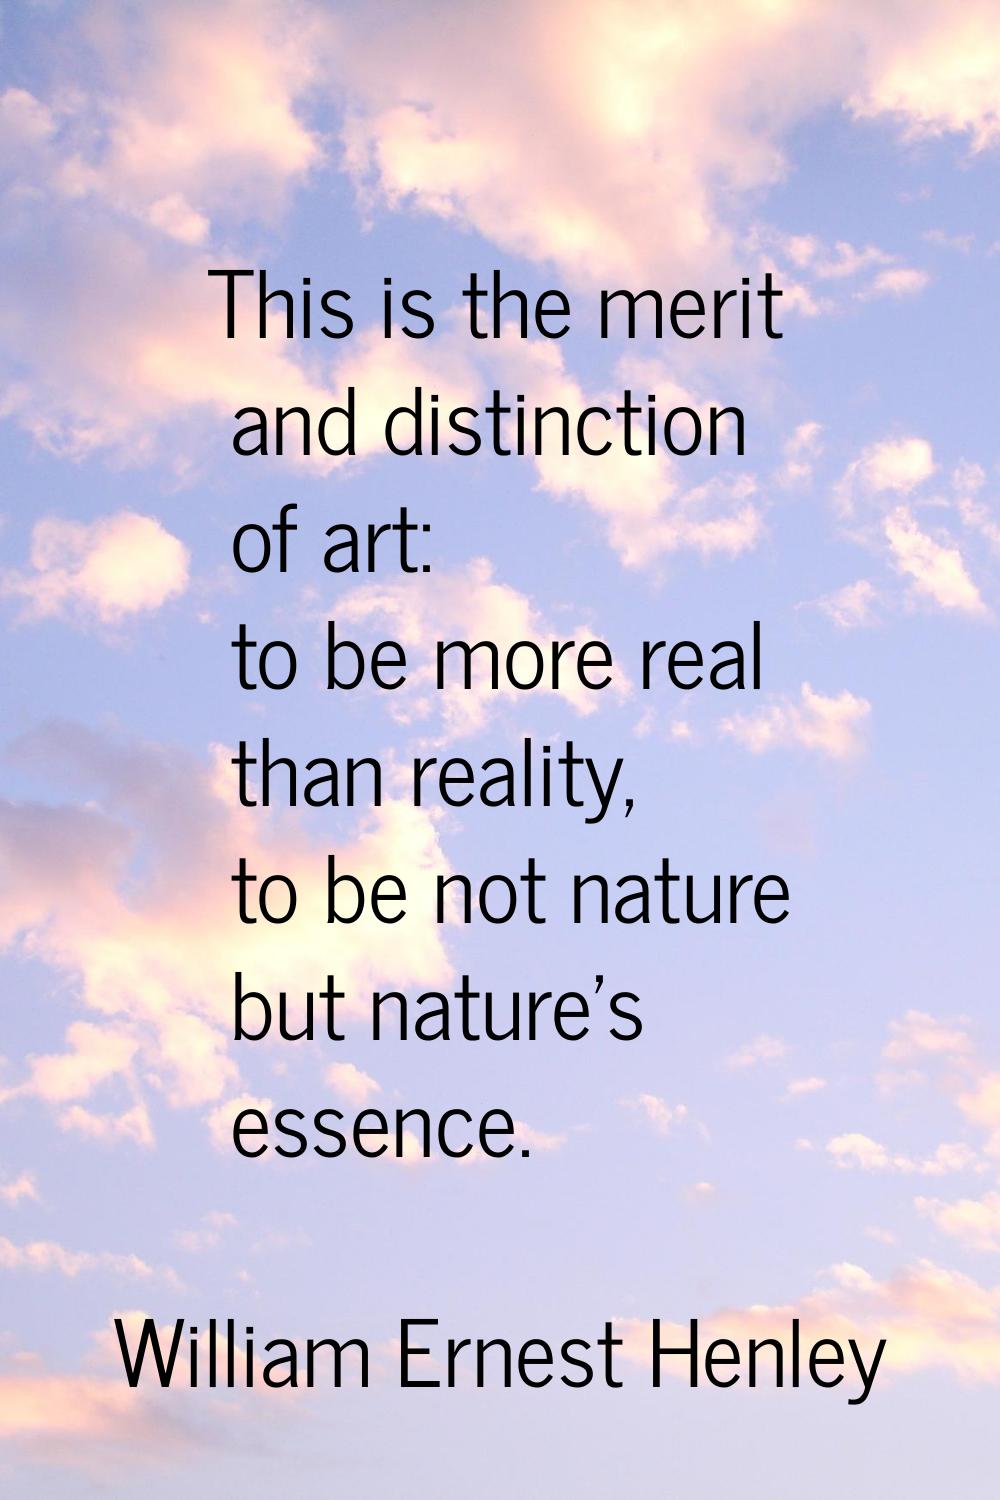 This is the merit and distinction of art: to be more real than reality, to be not nature but nature